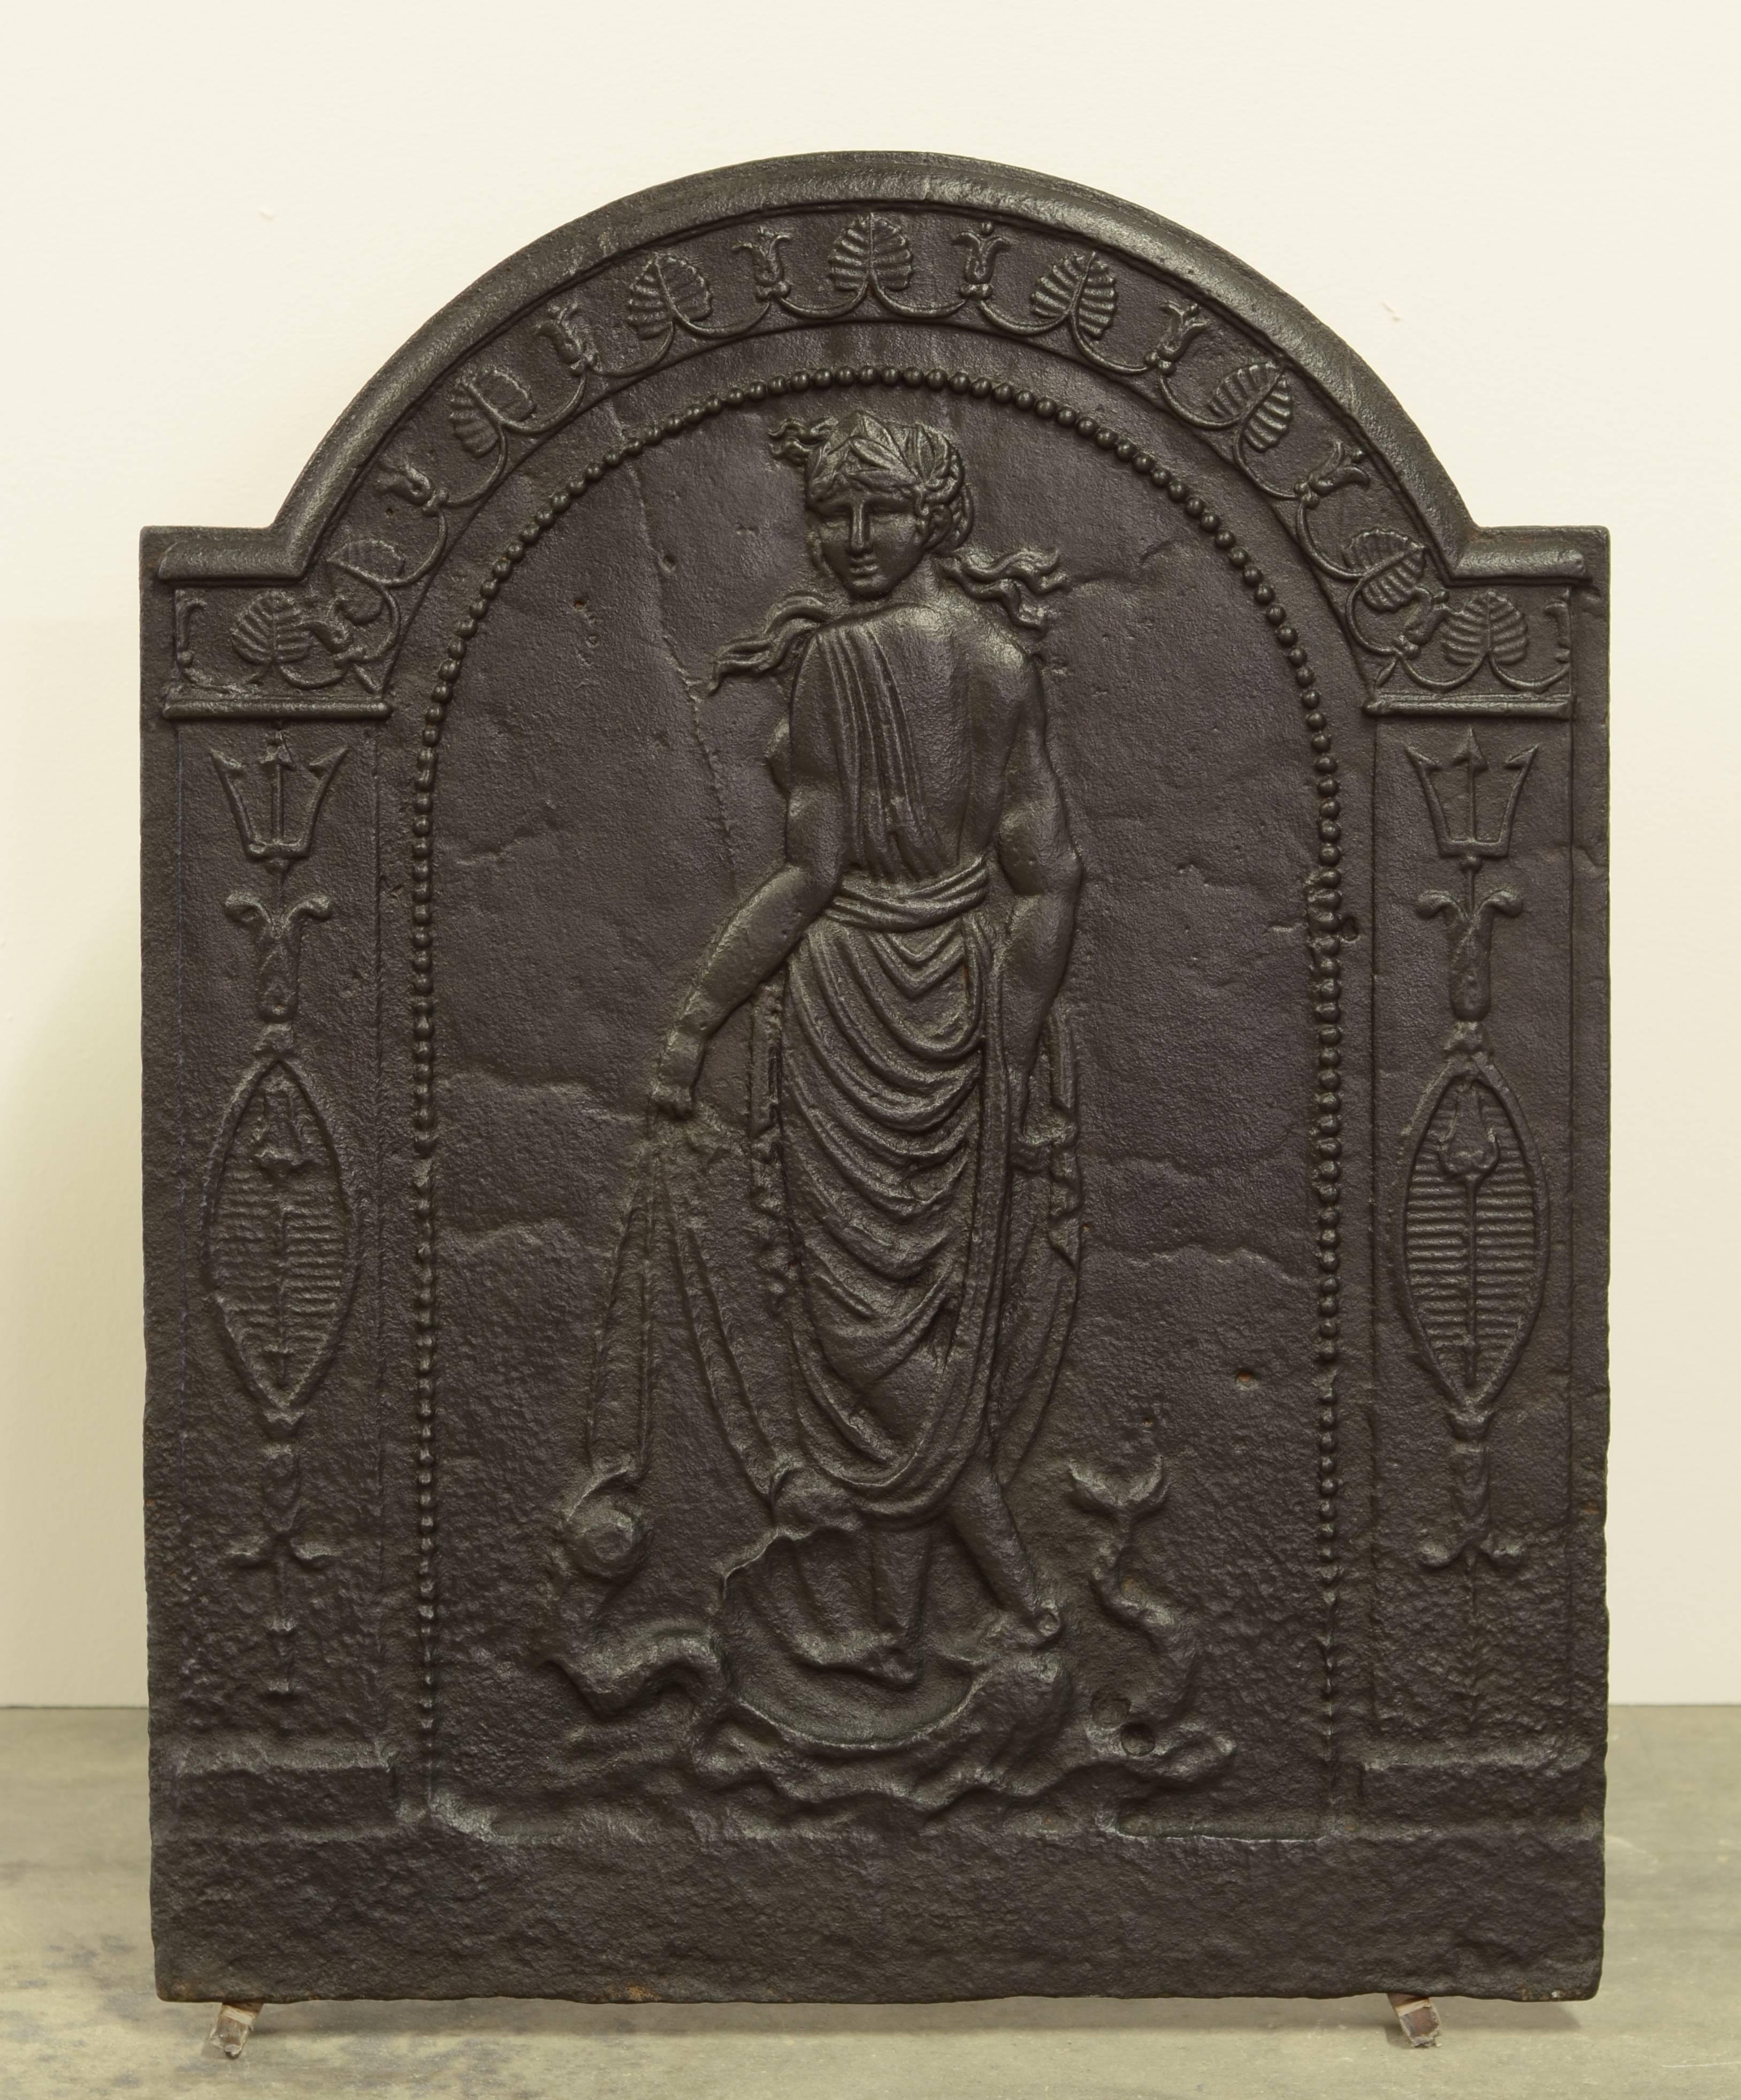 Beautifully detailed cast iron fireback showing Venus the Goddess of love, beauty and fertility.

This fireback is in great condition, to be used an a fireplace or as backsplash.
Can be supplied with stand.